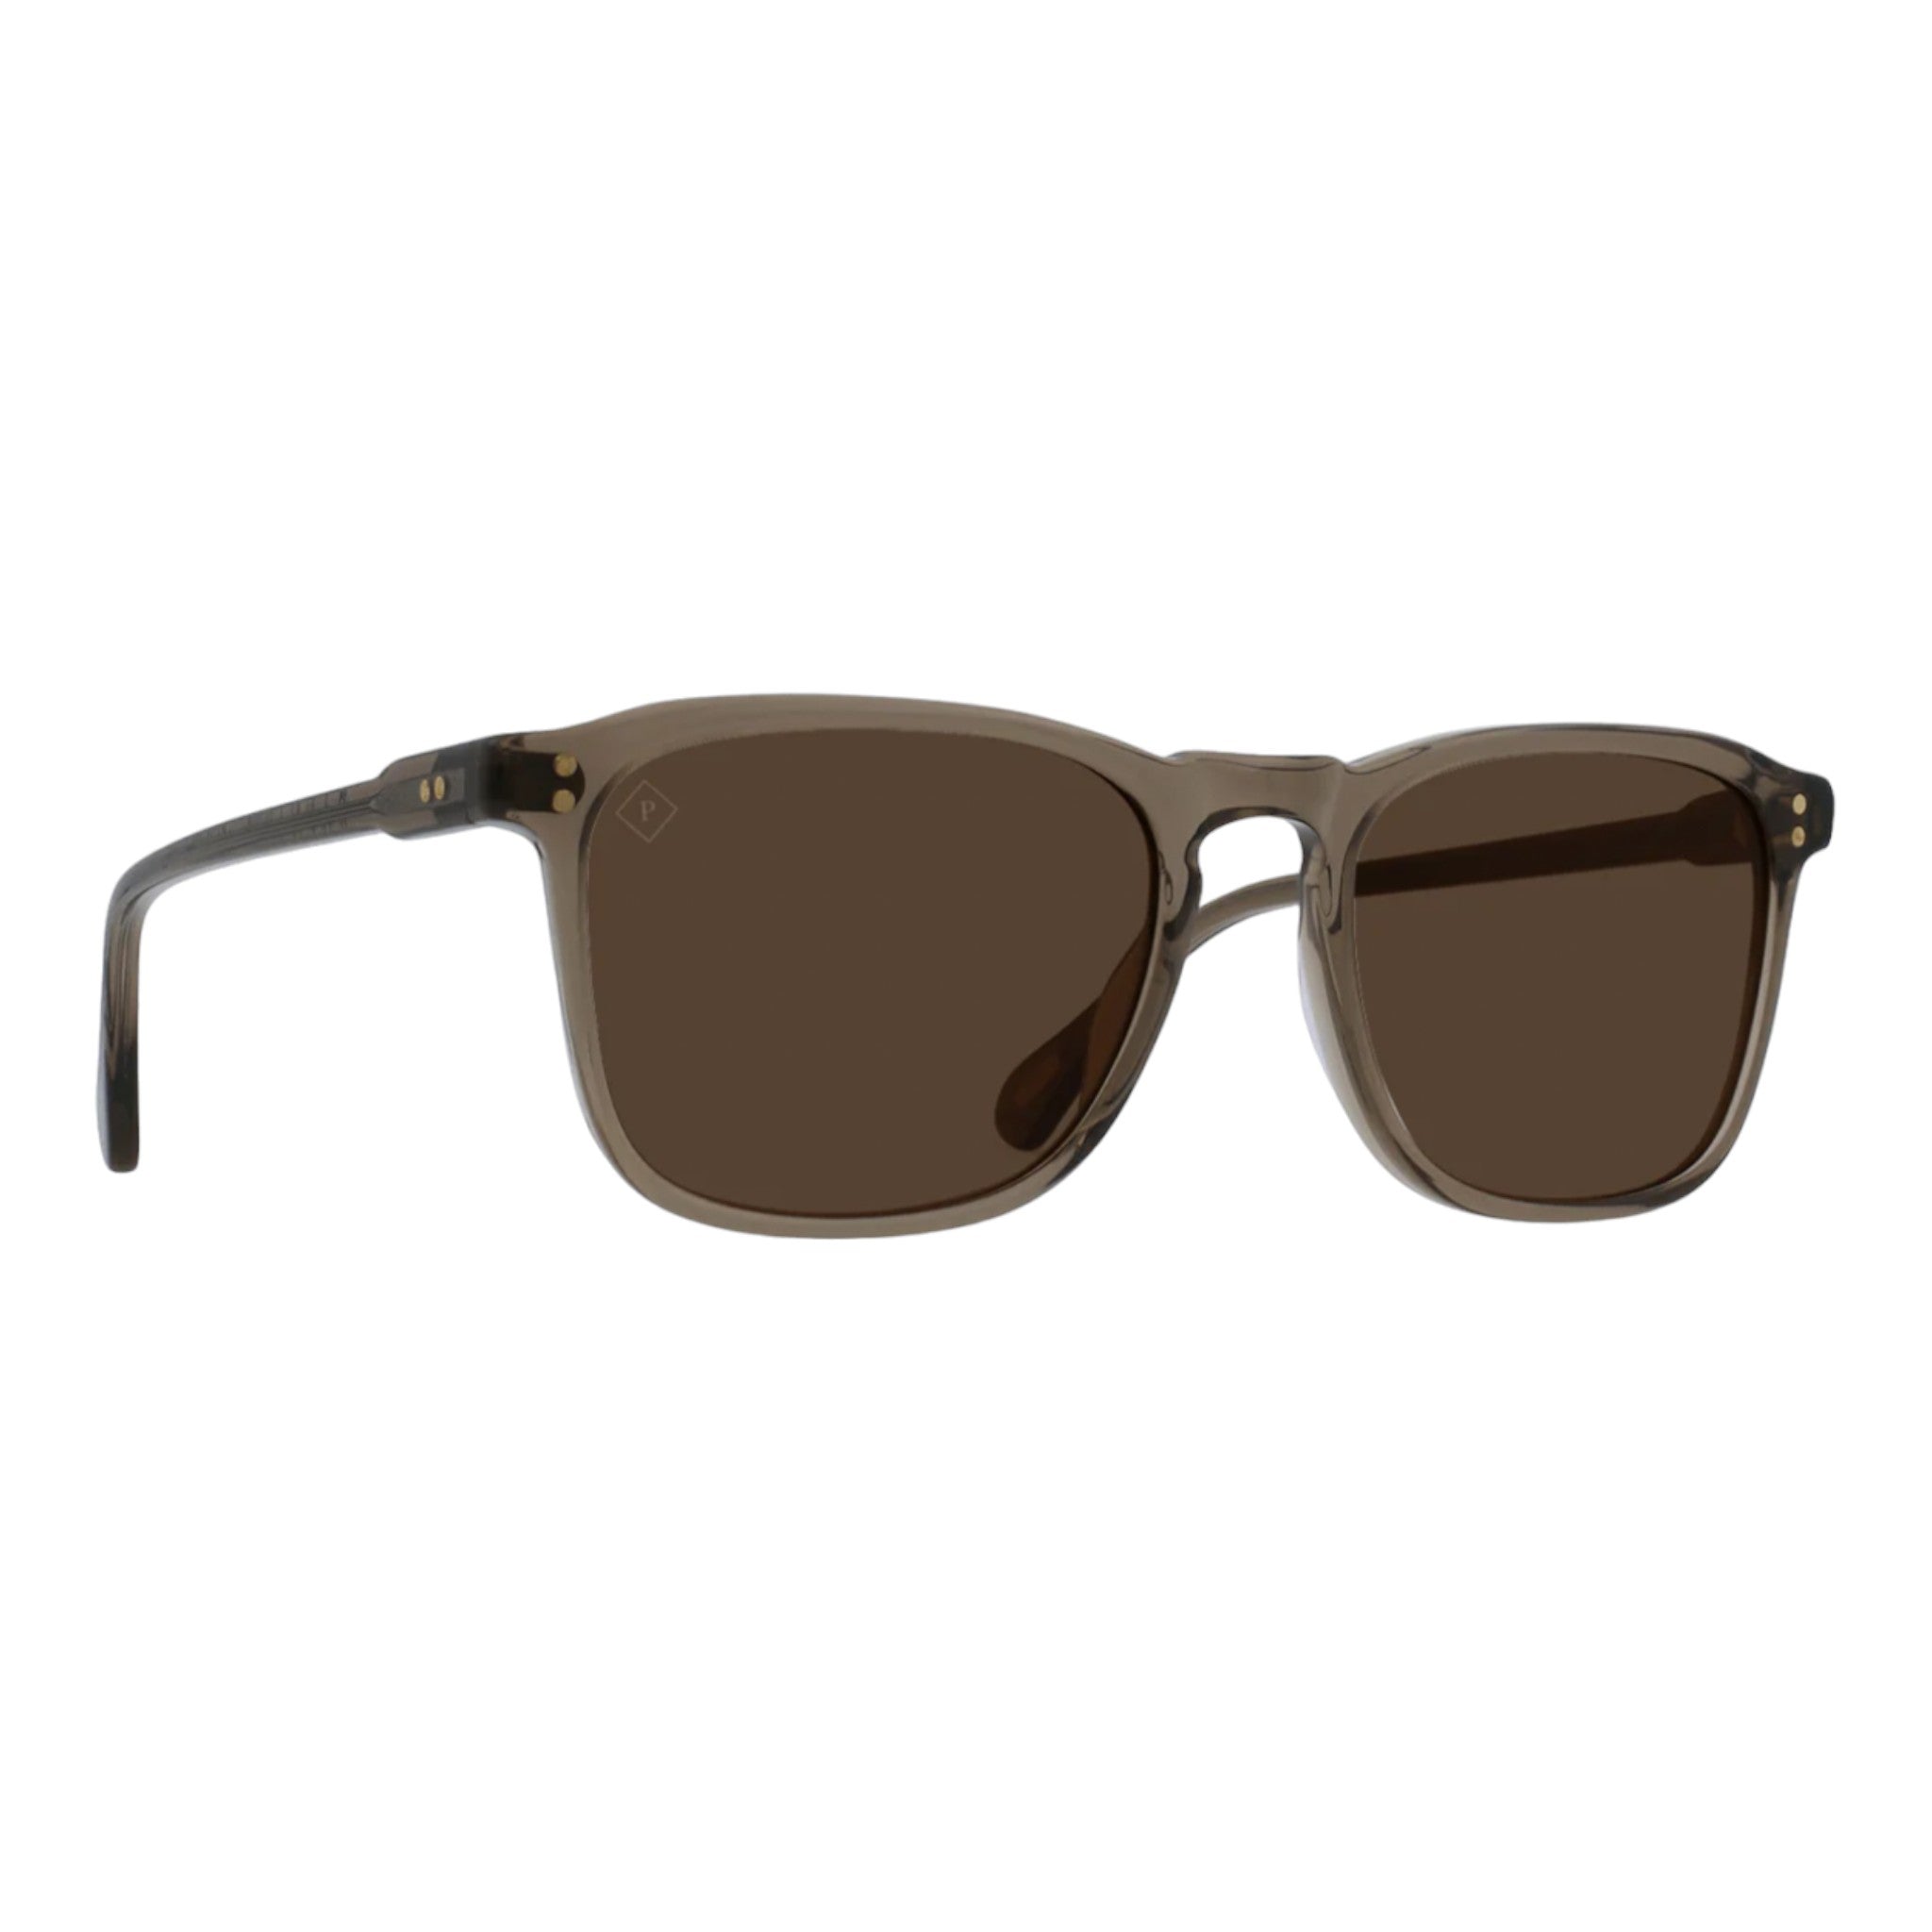 Raen - Wiley 54 Sunglasses - Ghost / Vibrant Brown Polarized